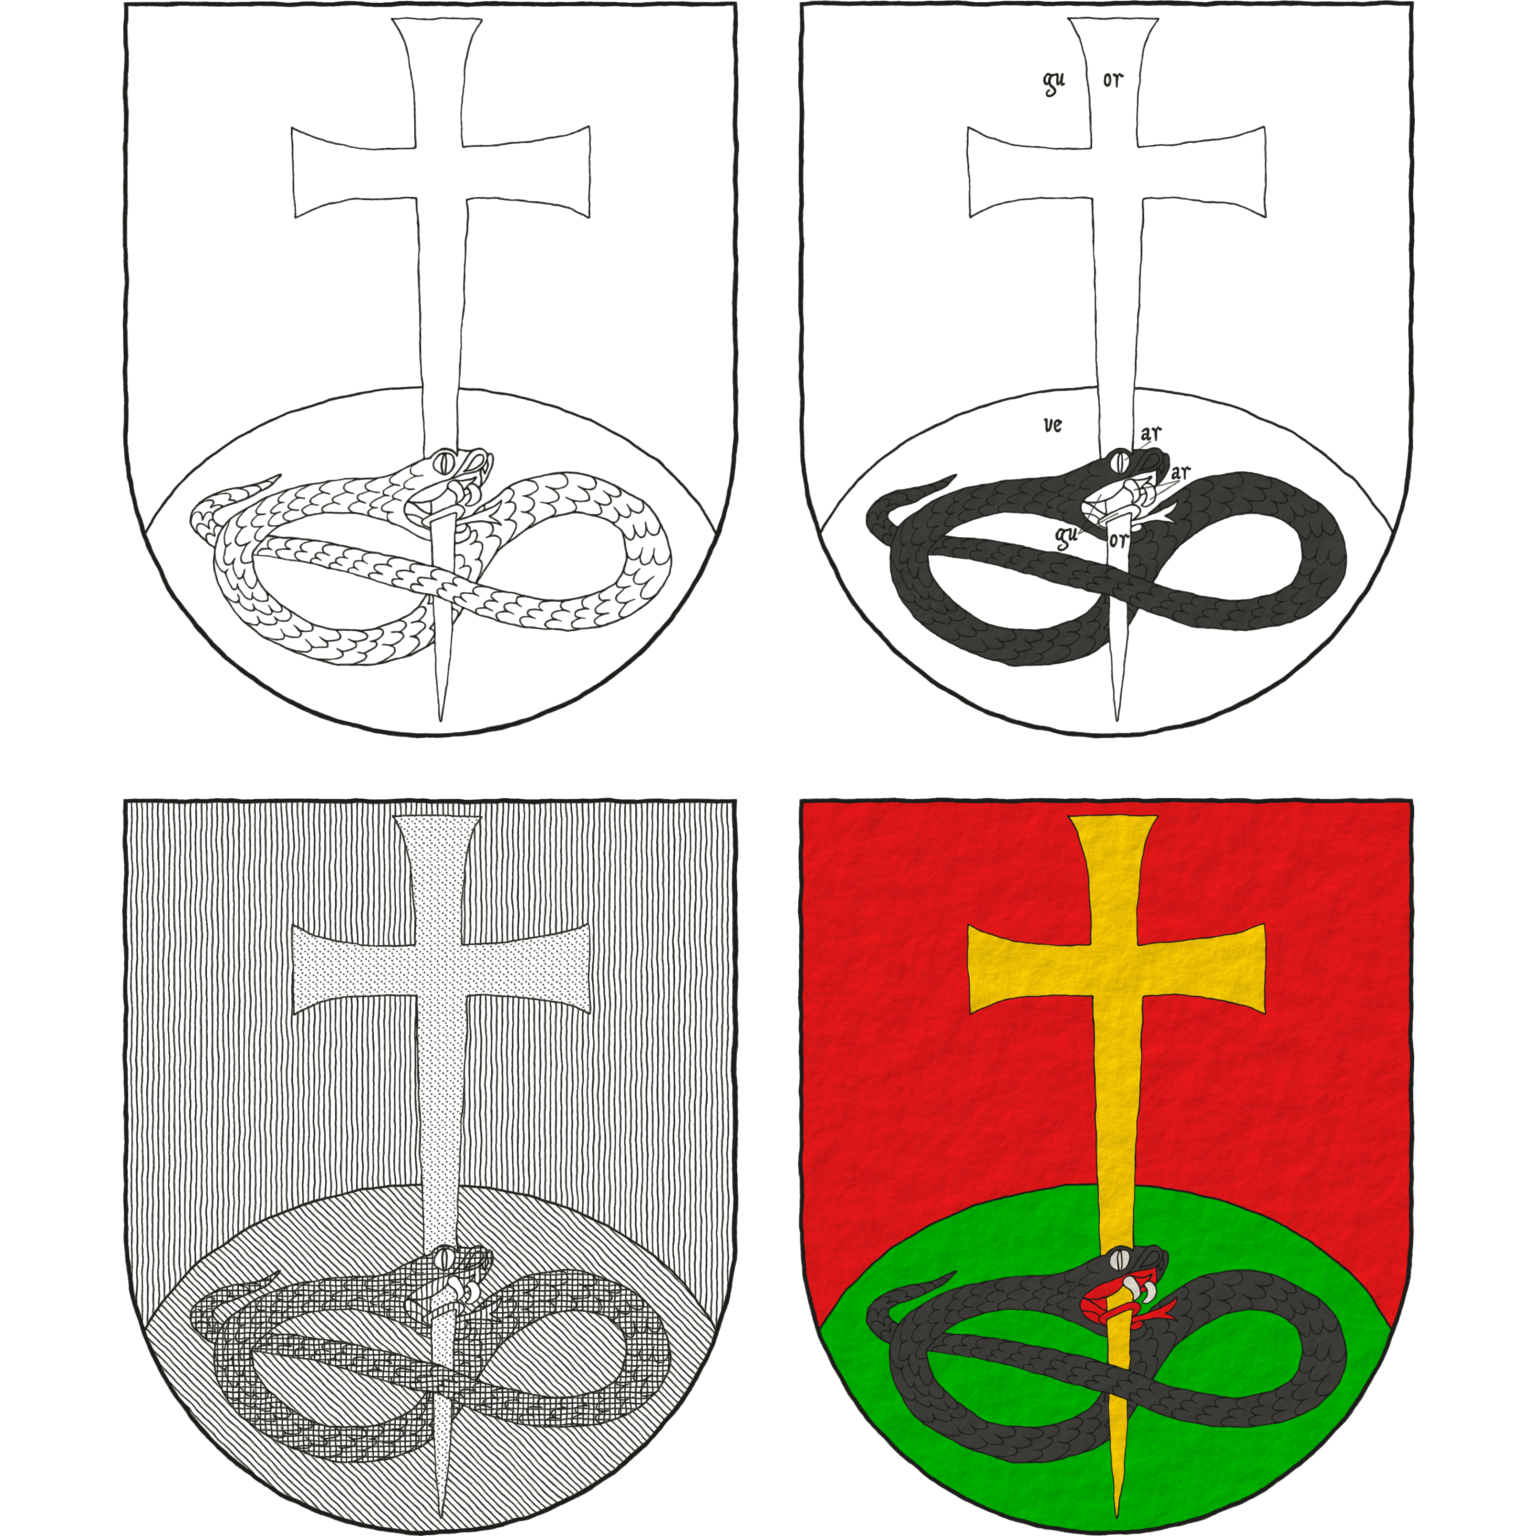 Gules, a base enarched Vert, overall a cross patty fitchy Or, piercing in base the head of a serpent nowed and facing sinister Sable, langued Gules.